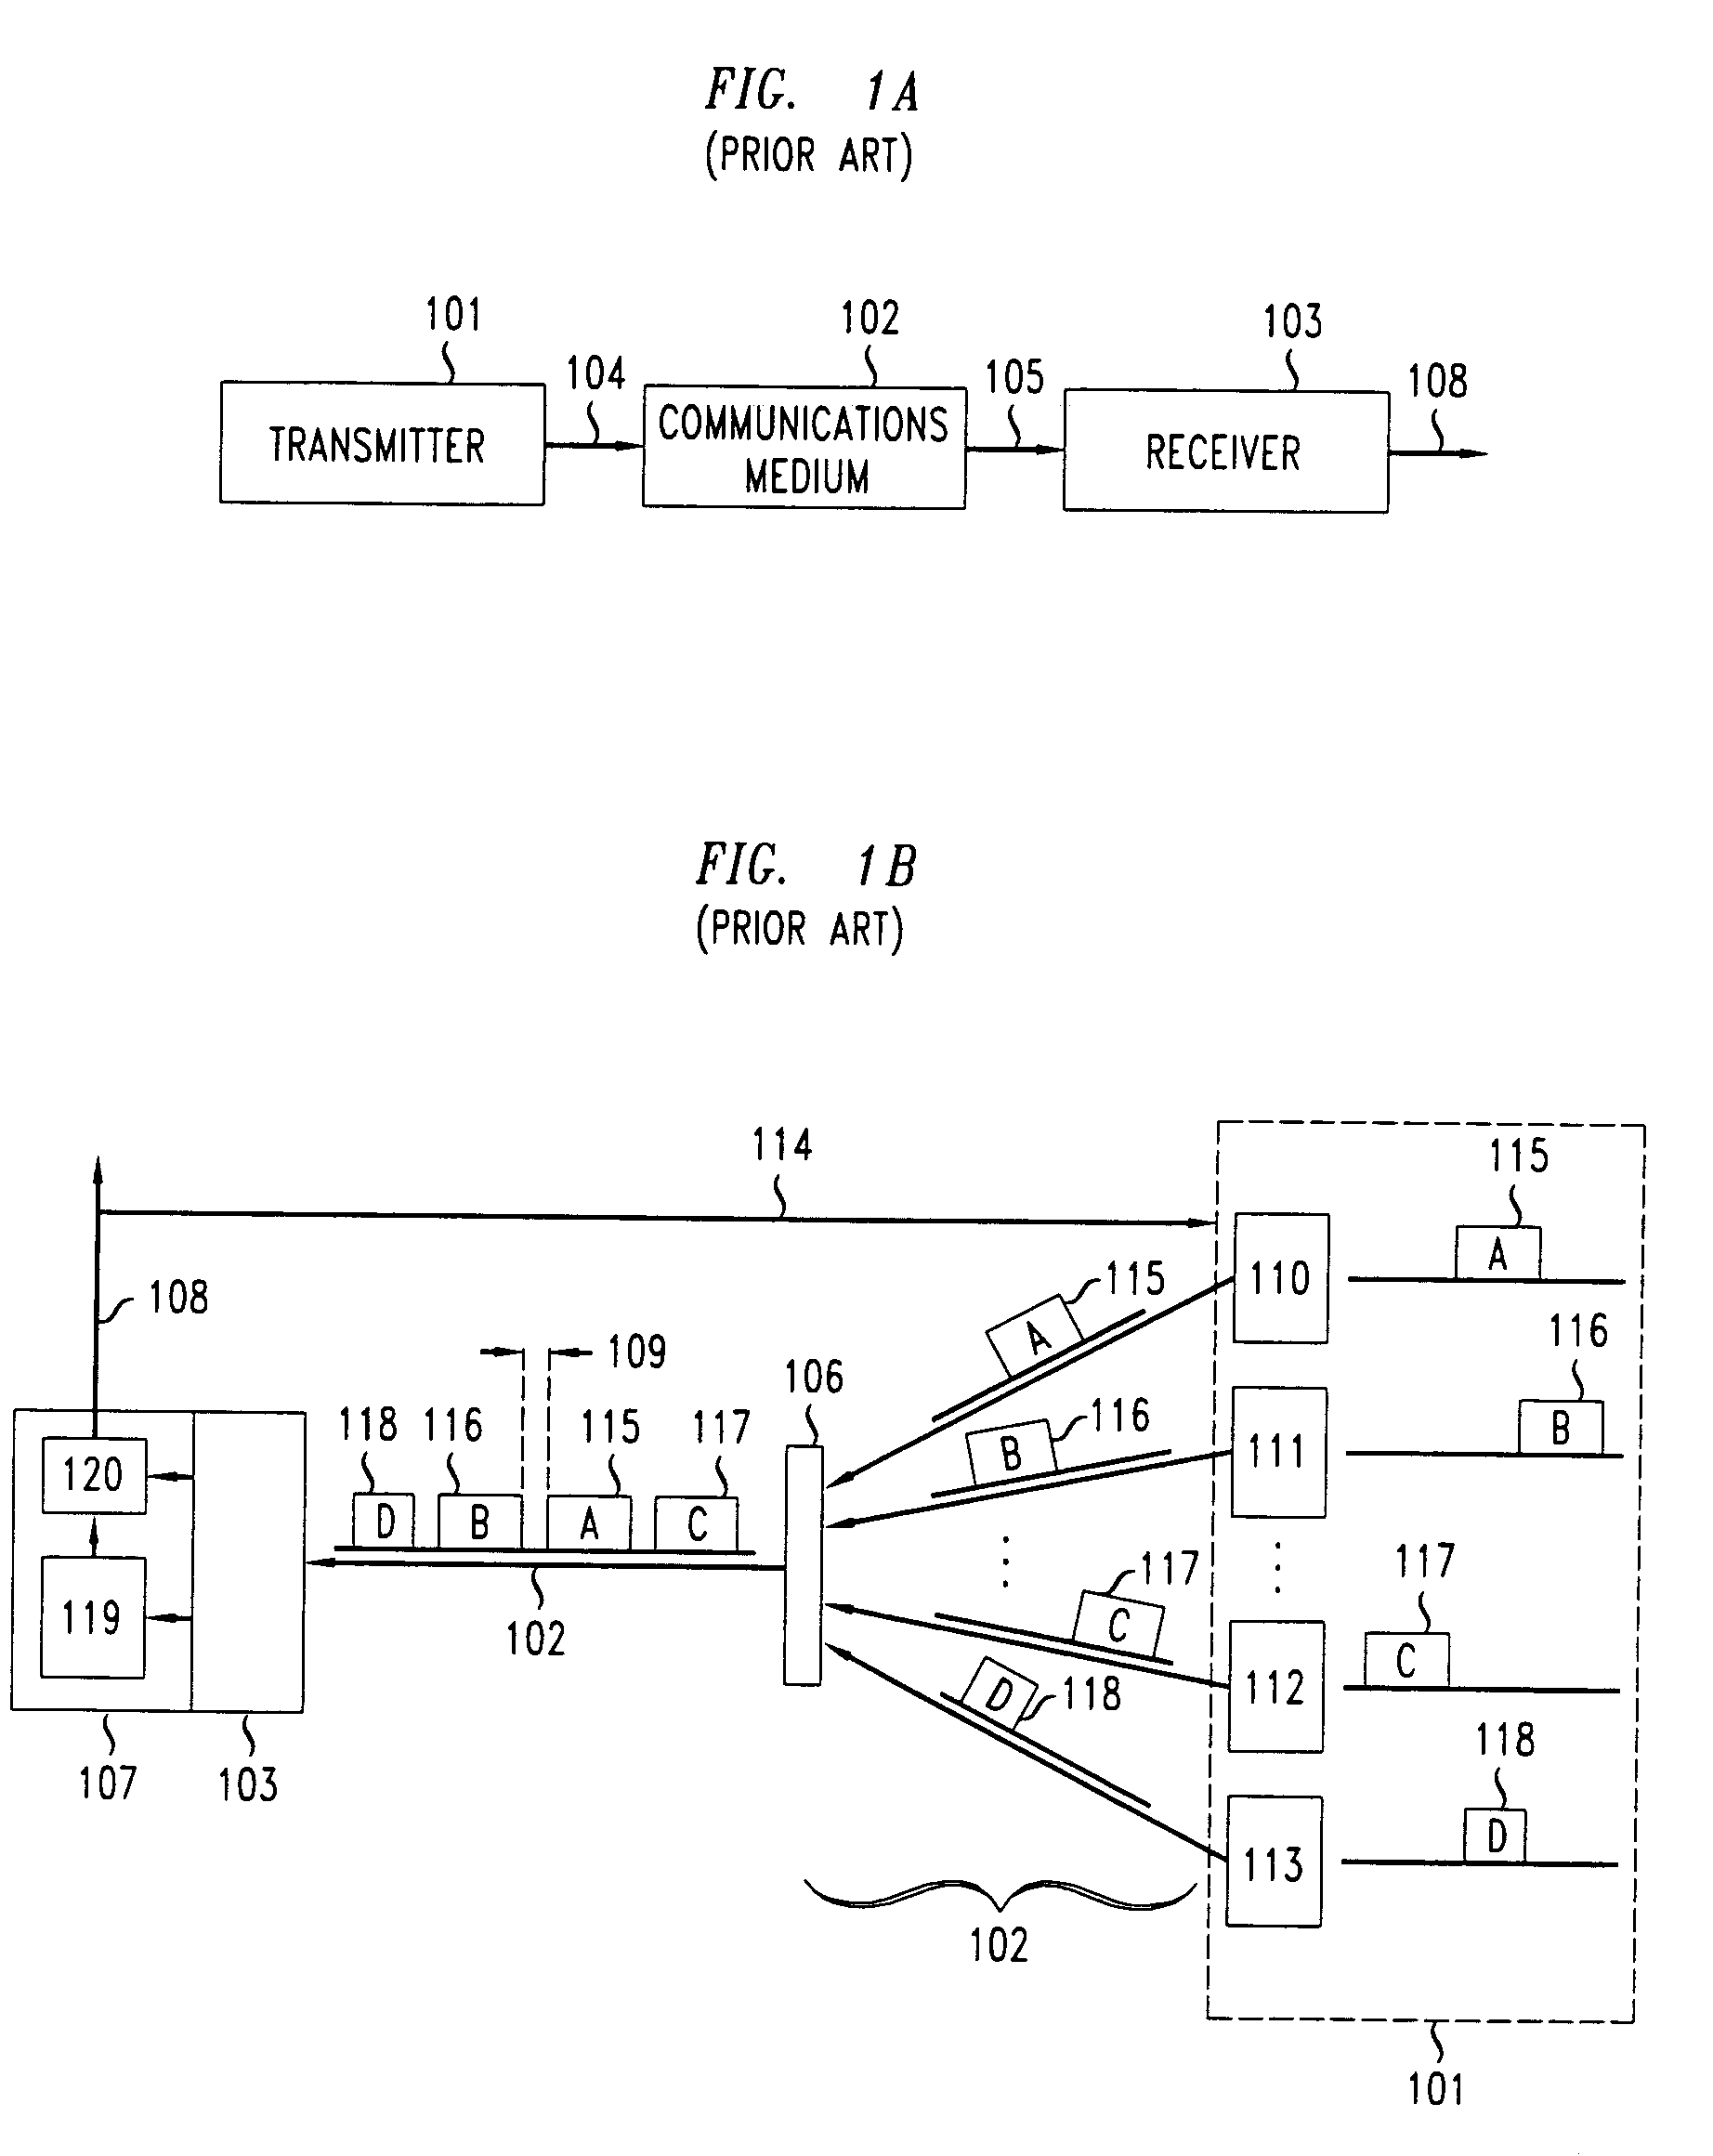 Method and apparatus for multiphase, fast-locking clock and data recovery